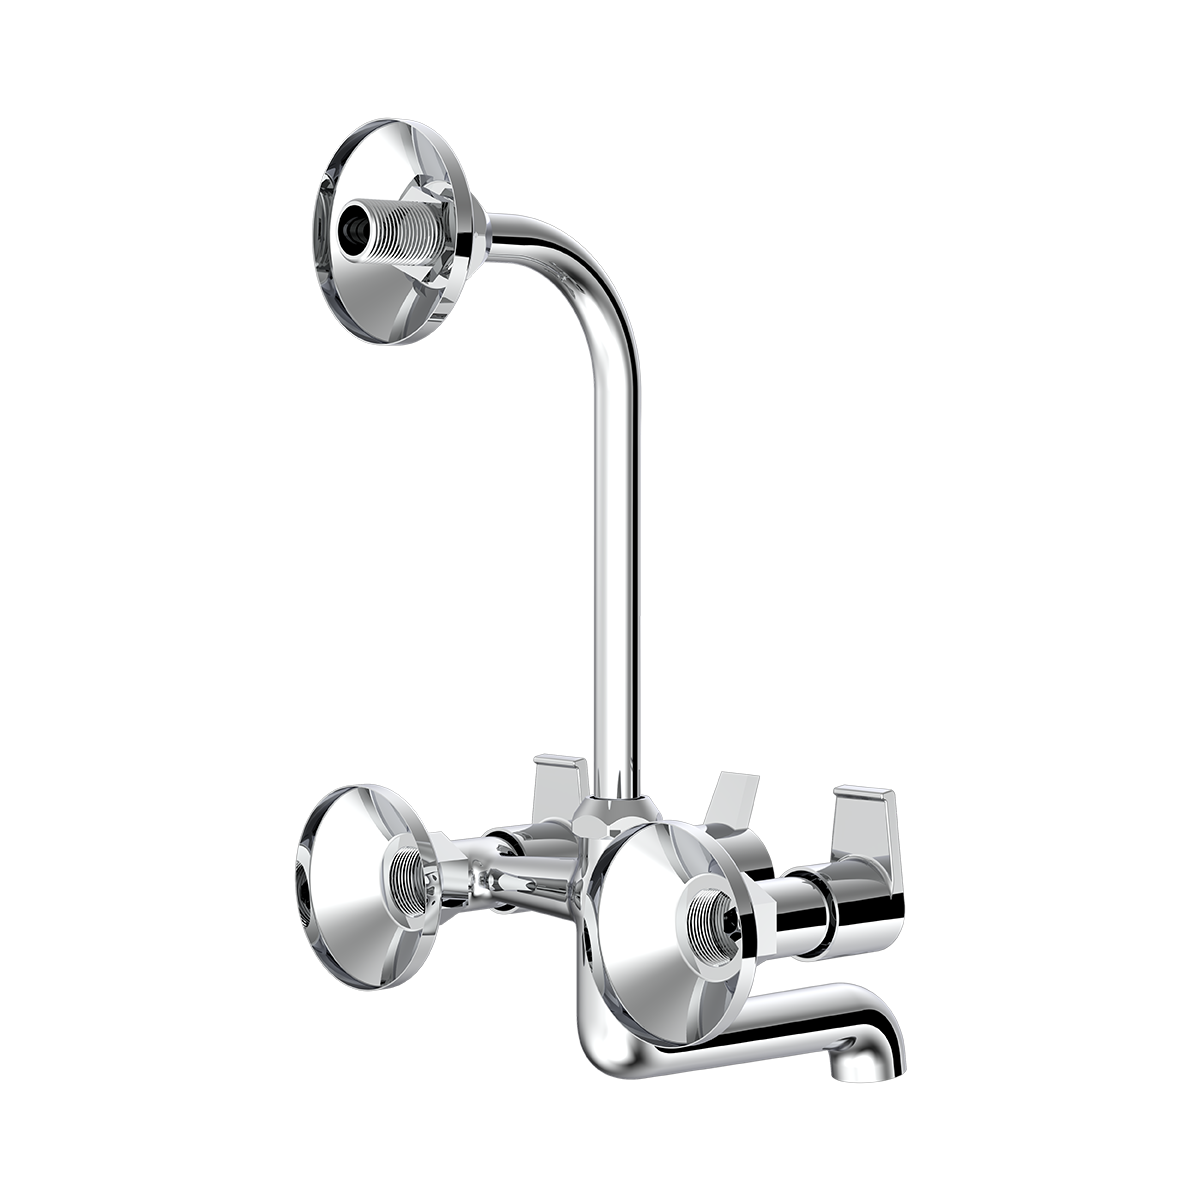 Wall Mixer With Provision Of Overhead Shower With